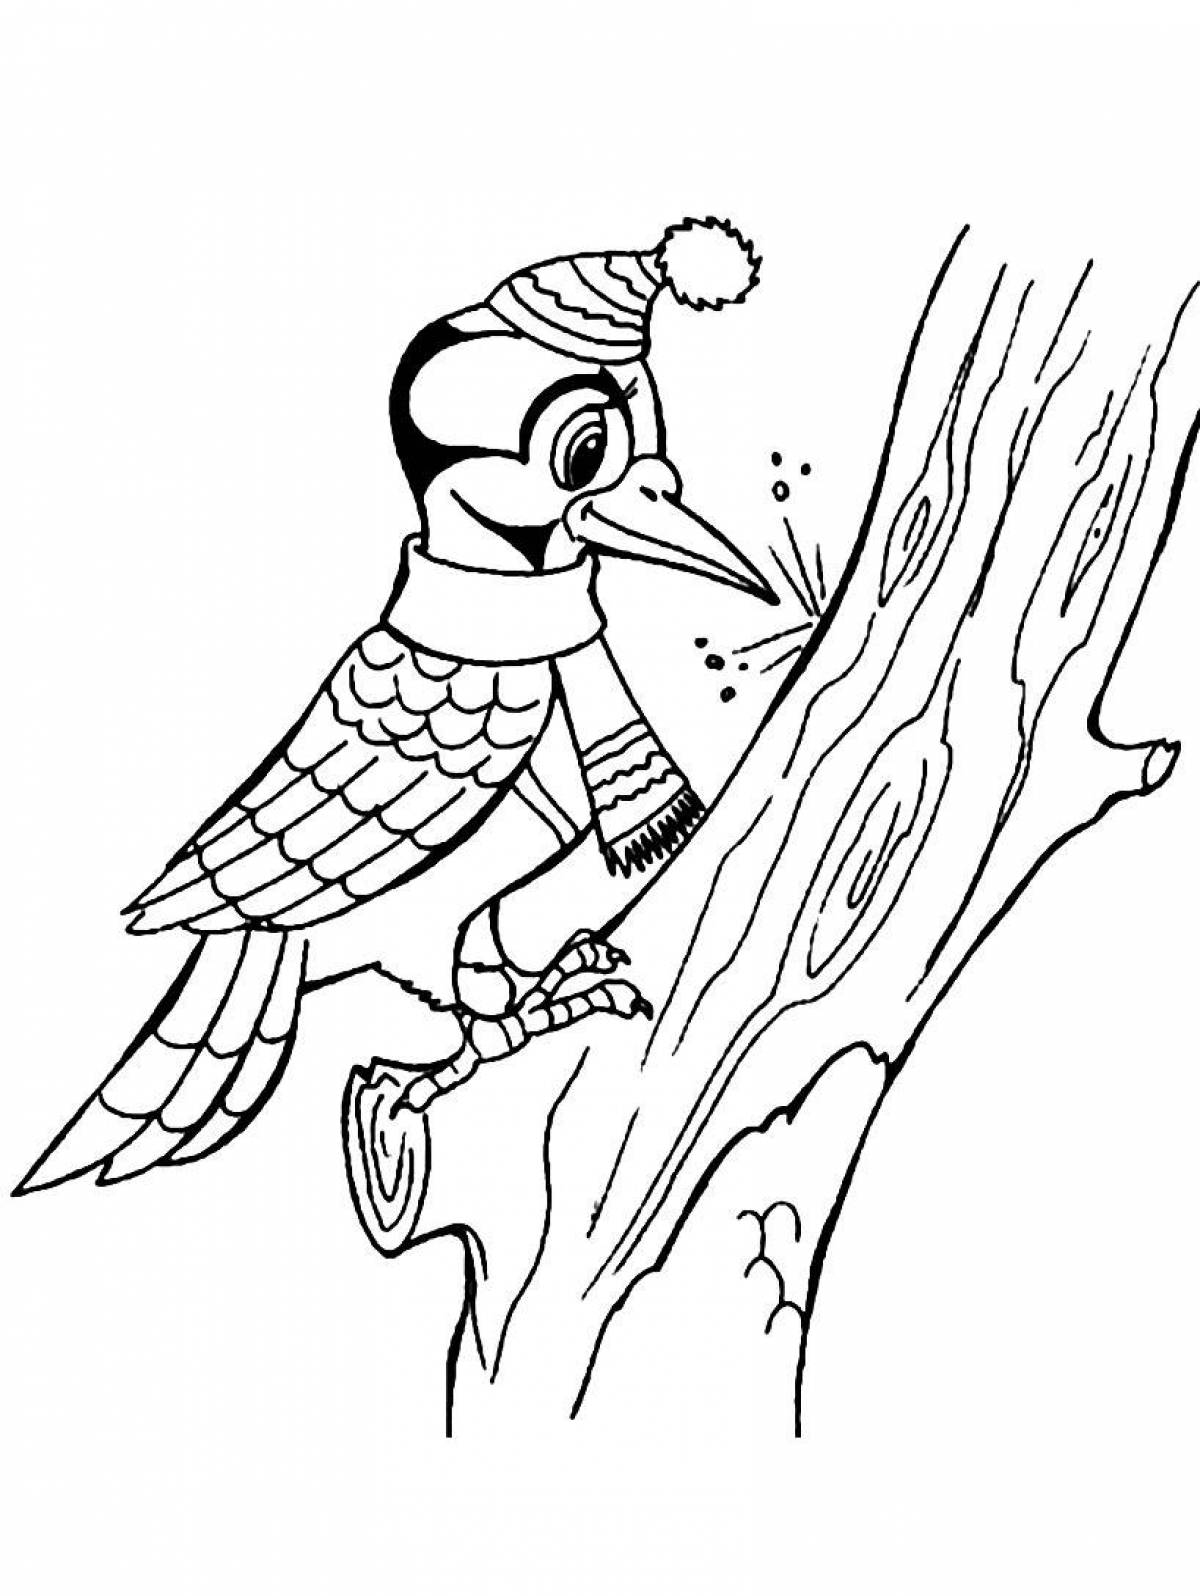 Coloring book cheeky woodpecker for kids